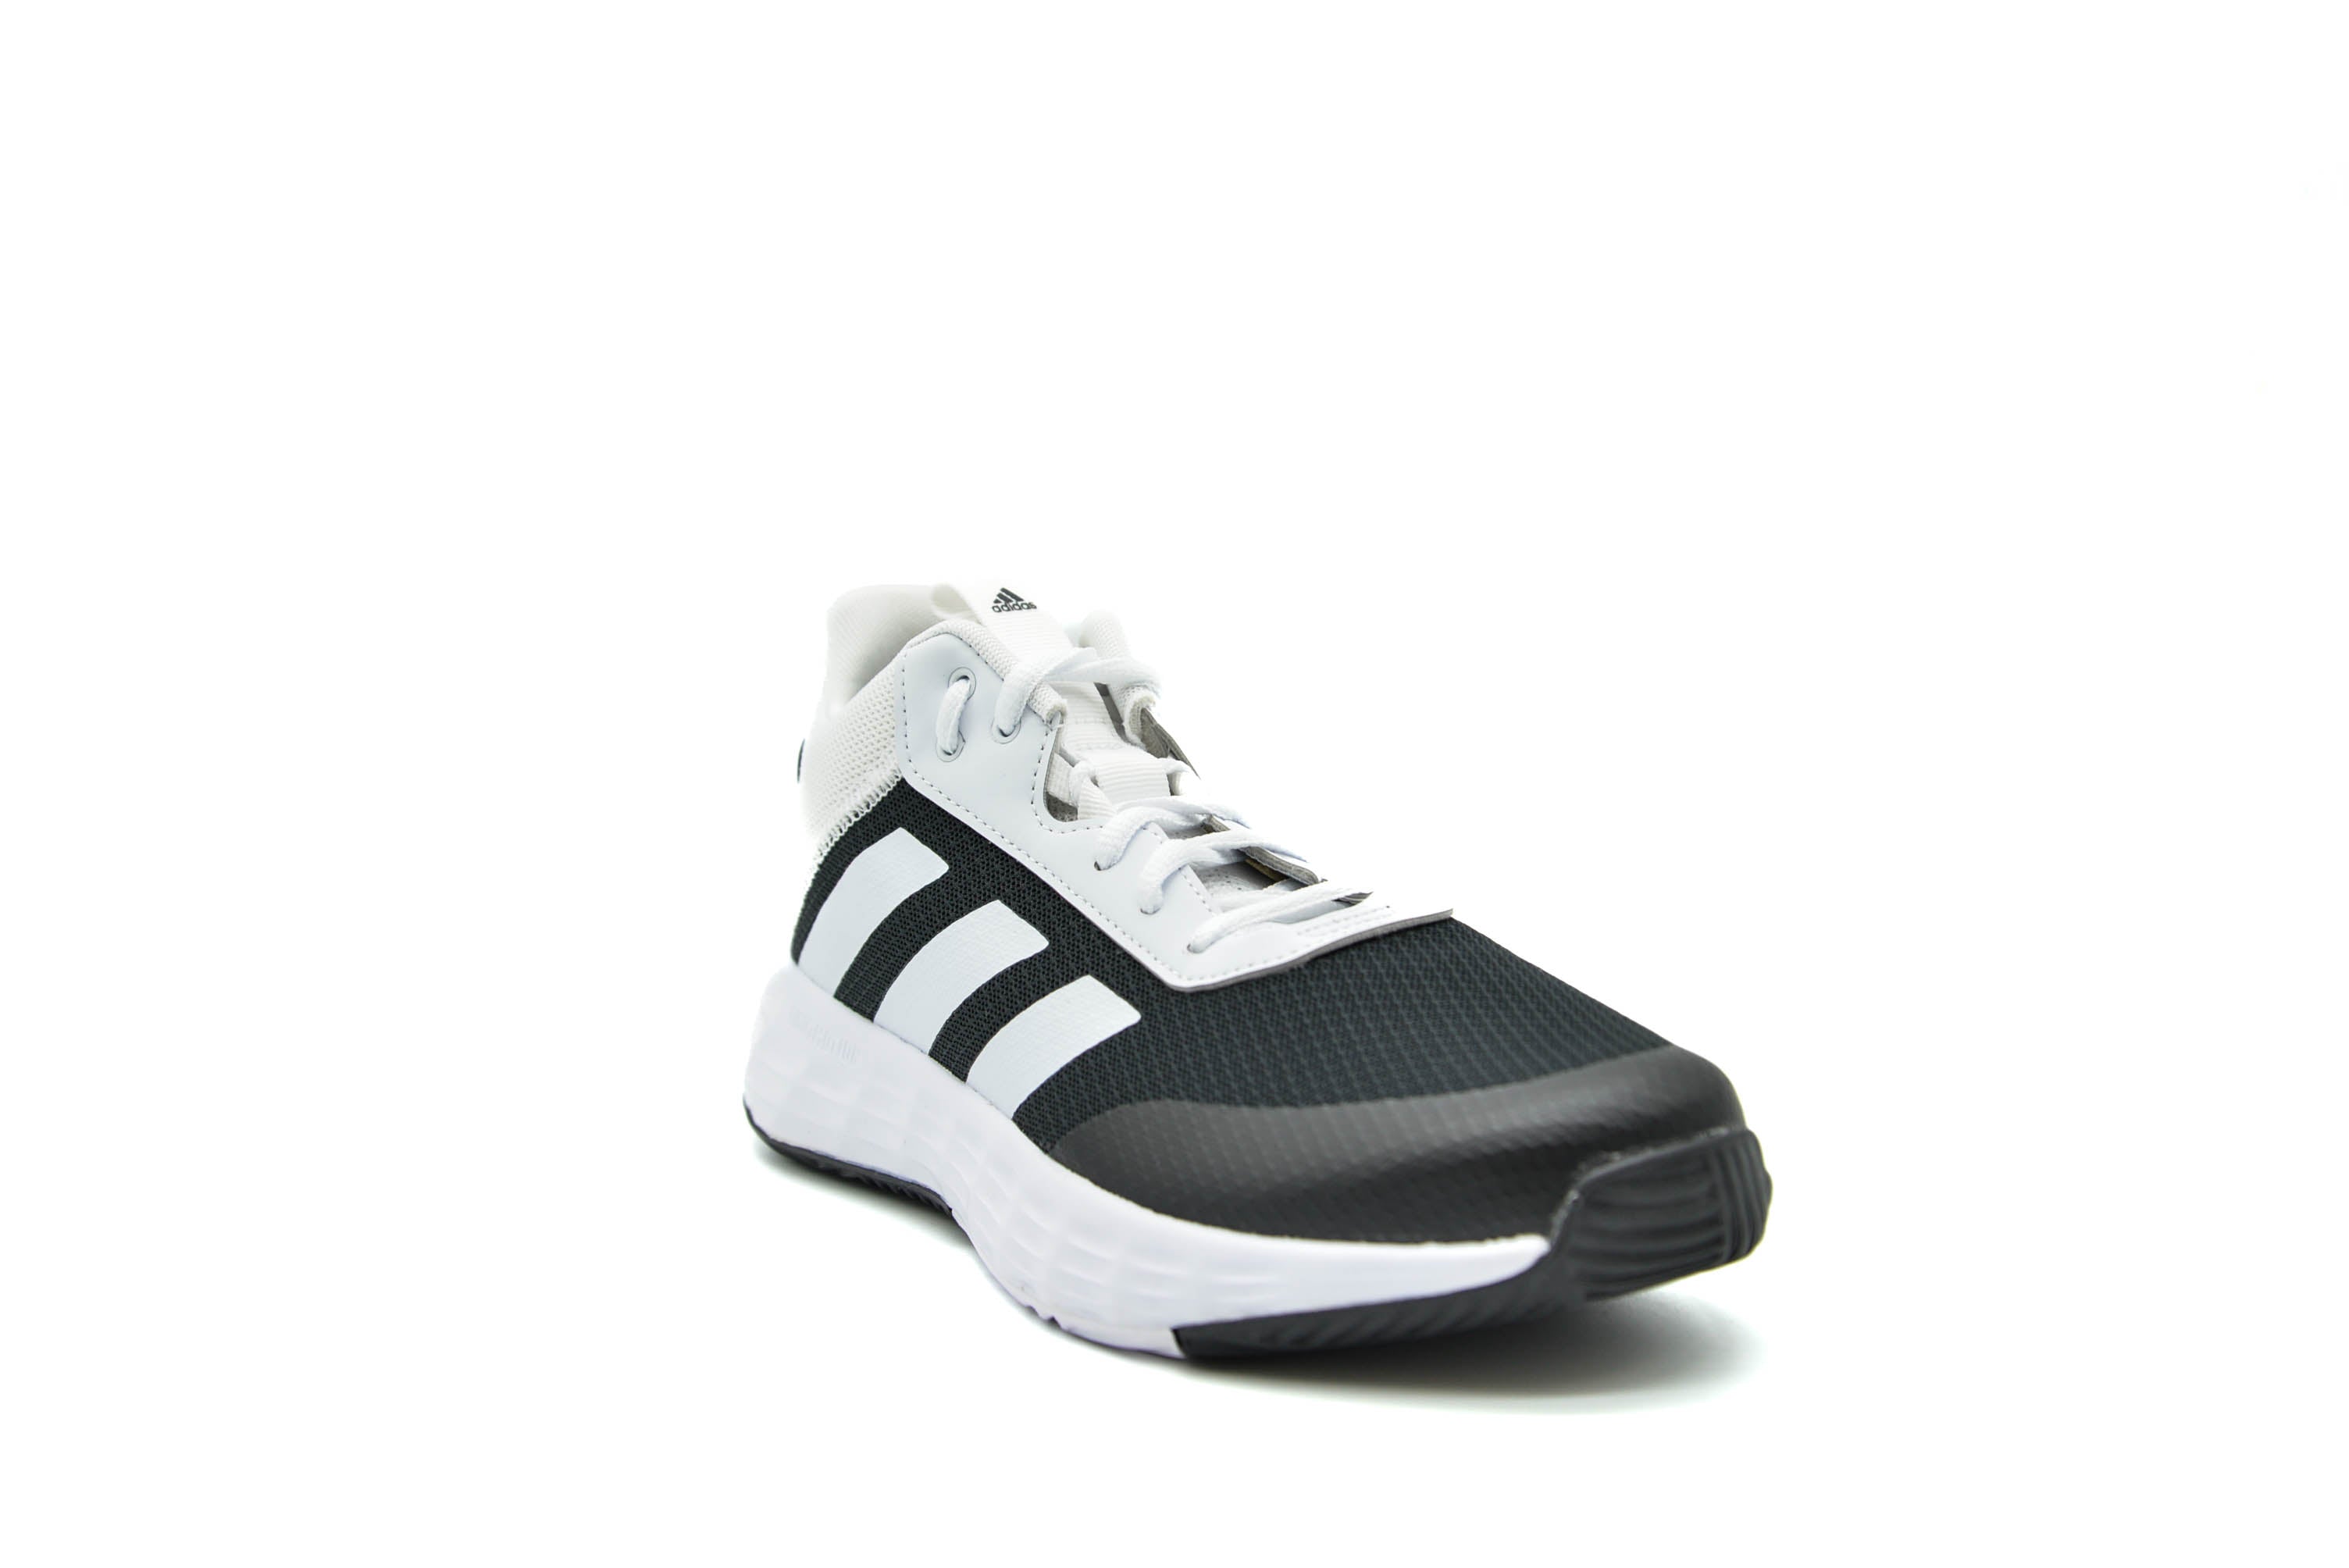 ADIDAS OWNTHEGAME 2.0 SHOES